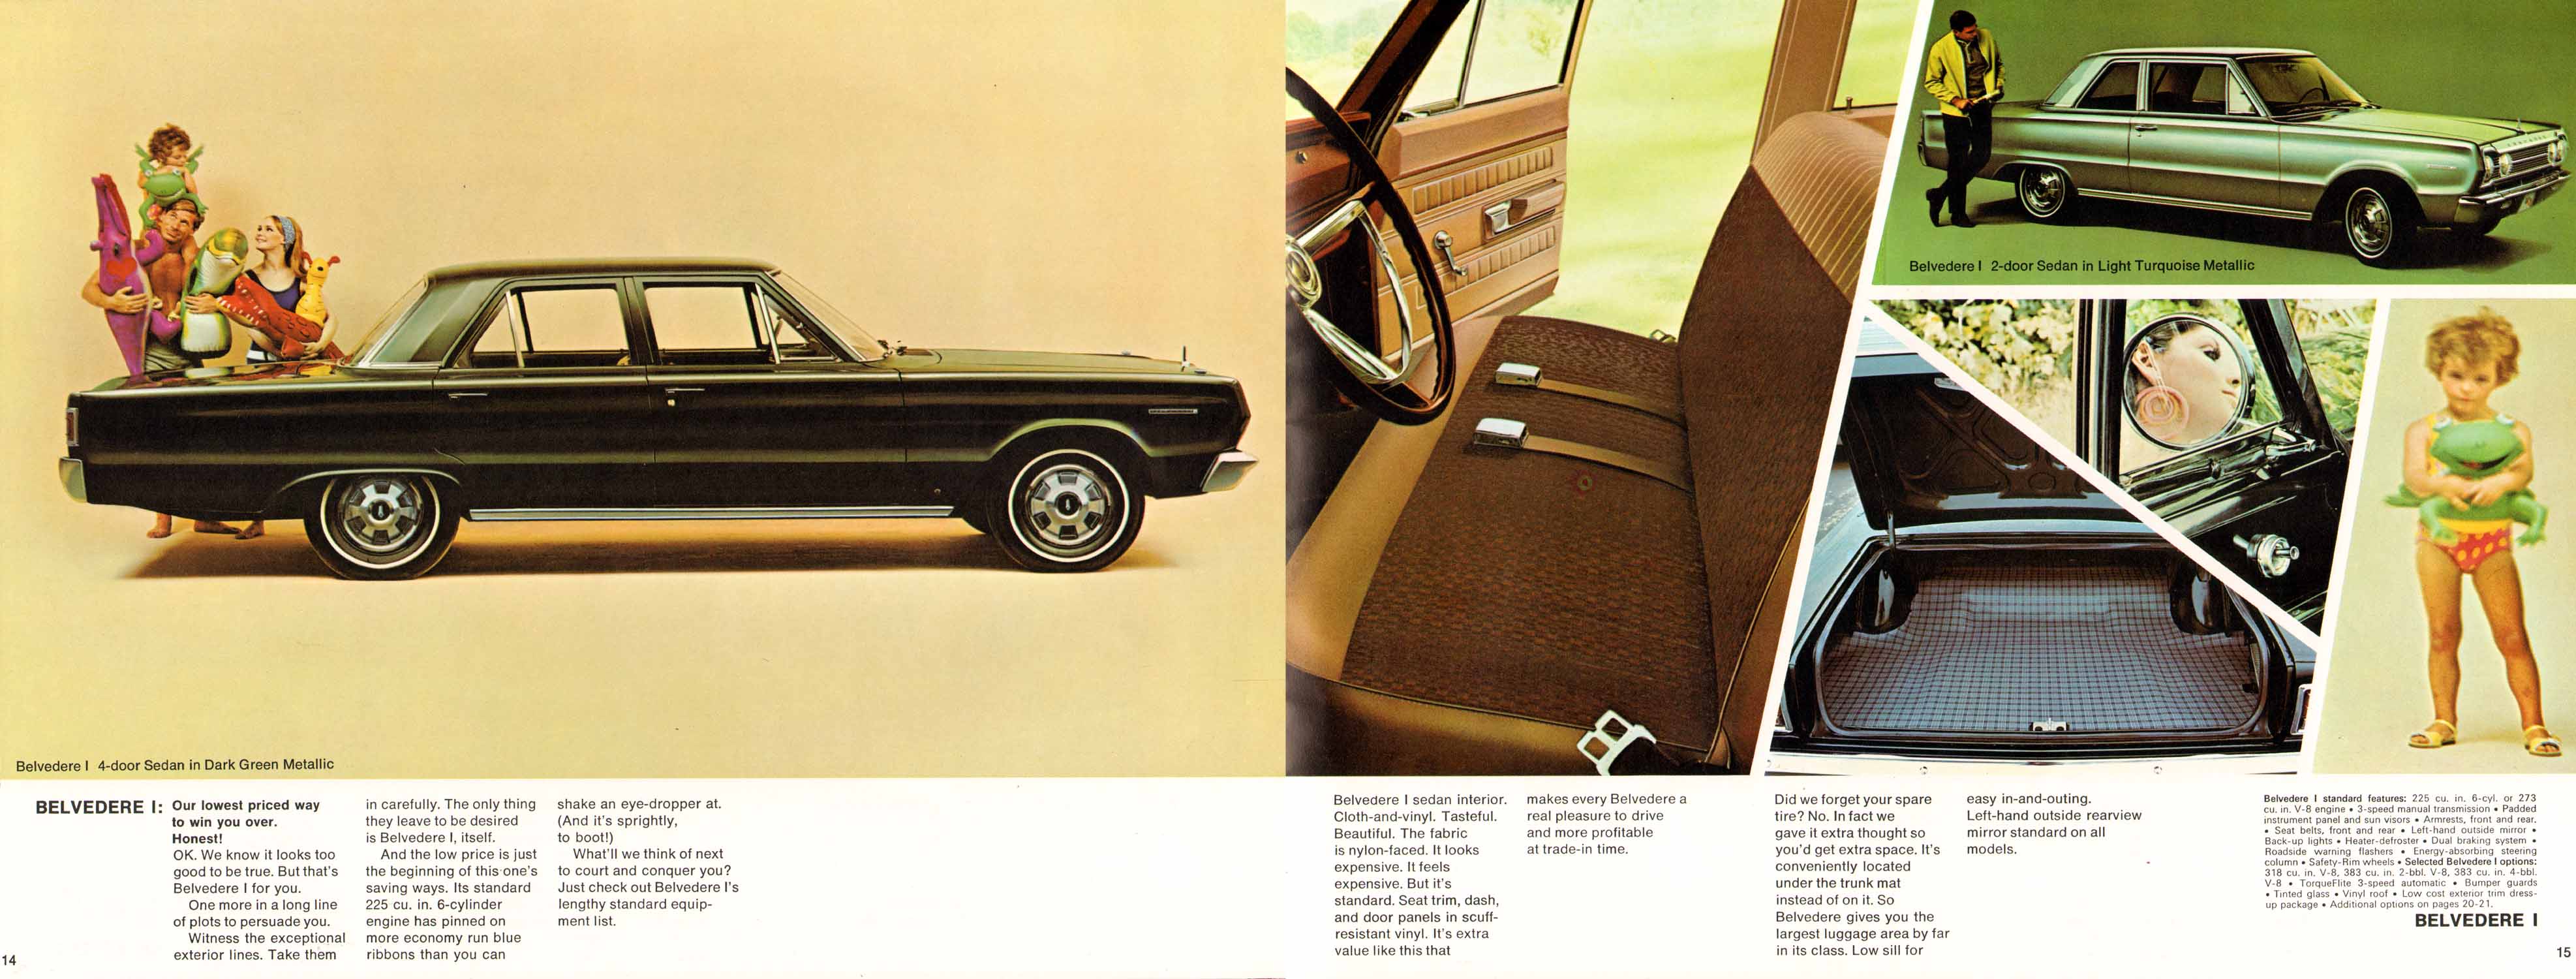 1967 Plymouth Belvedere-14-15